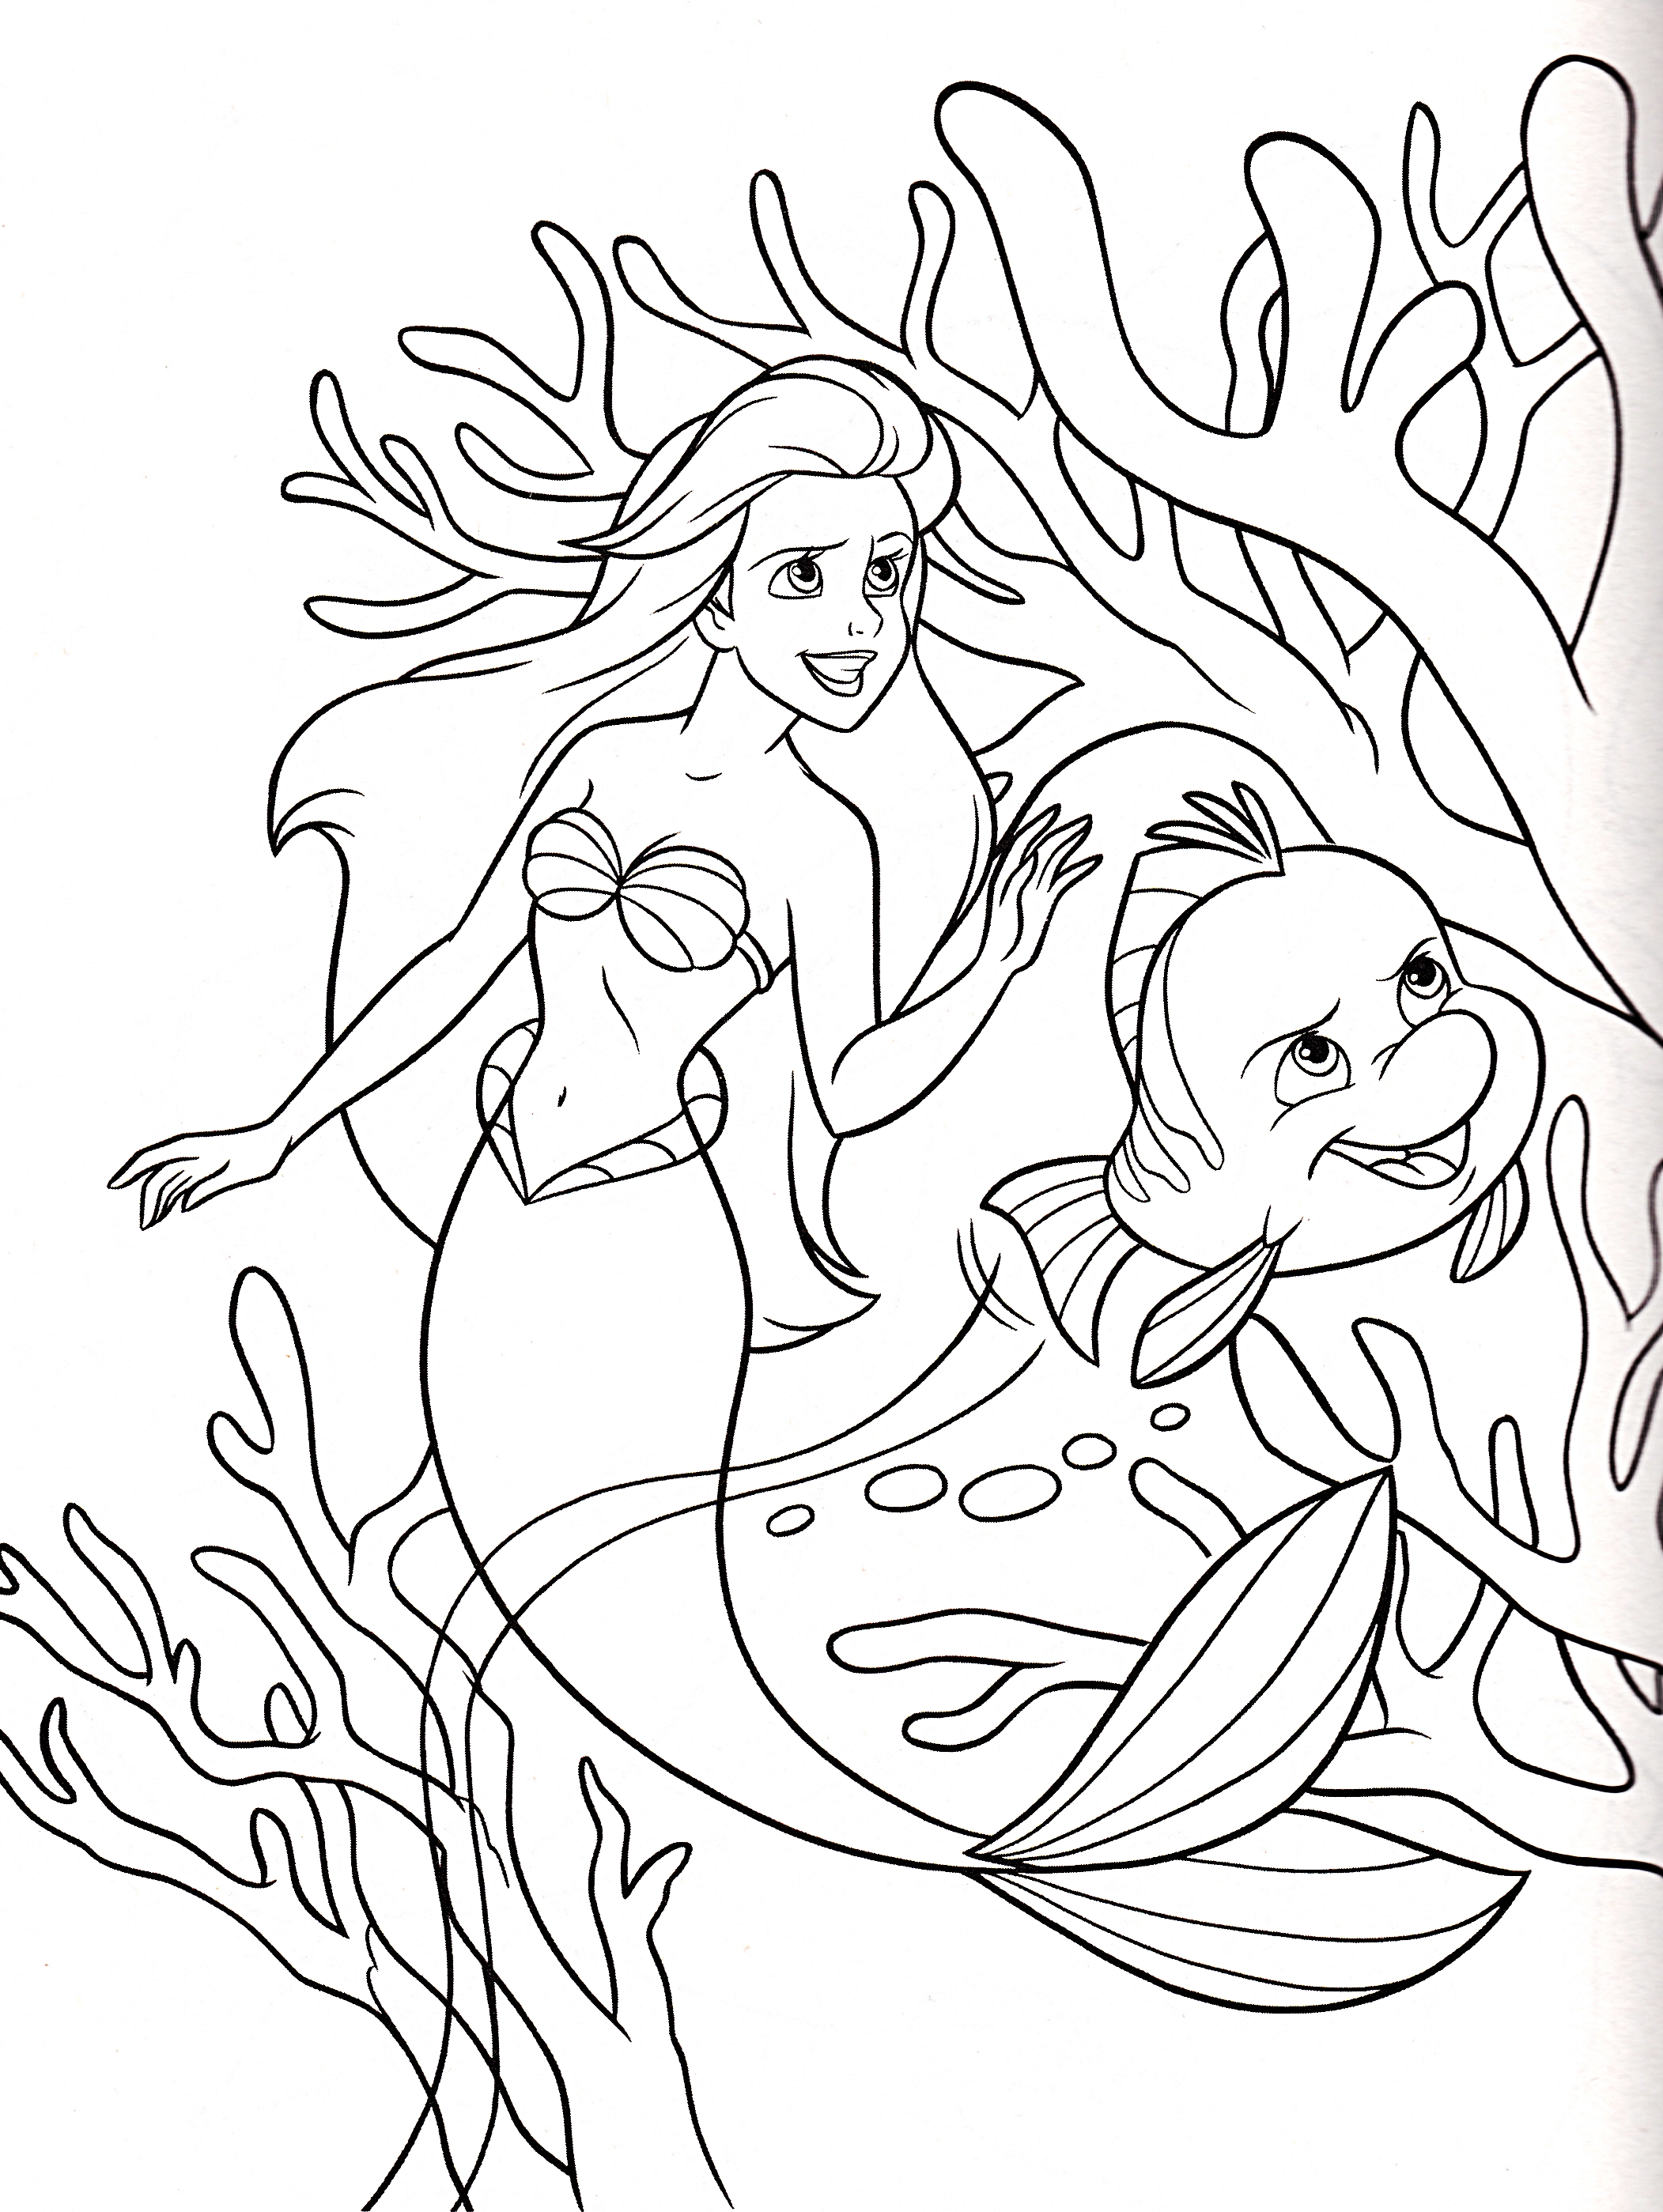 Full size 2103 — 2798 Attached Disney s The Little Mermaid Colouring Sheets · · 